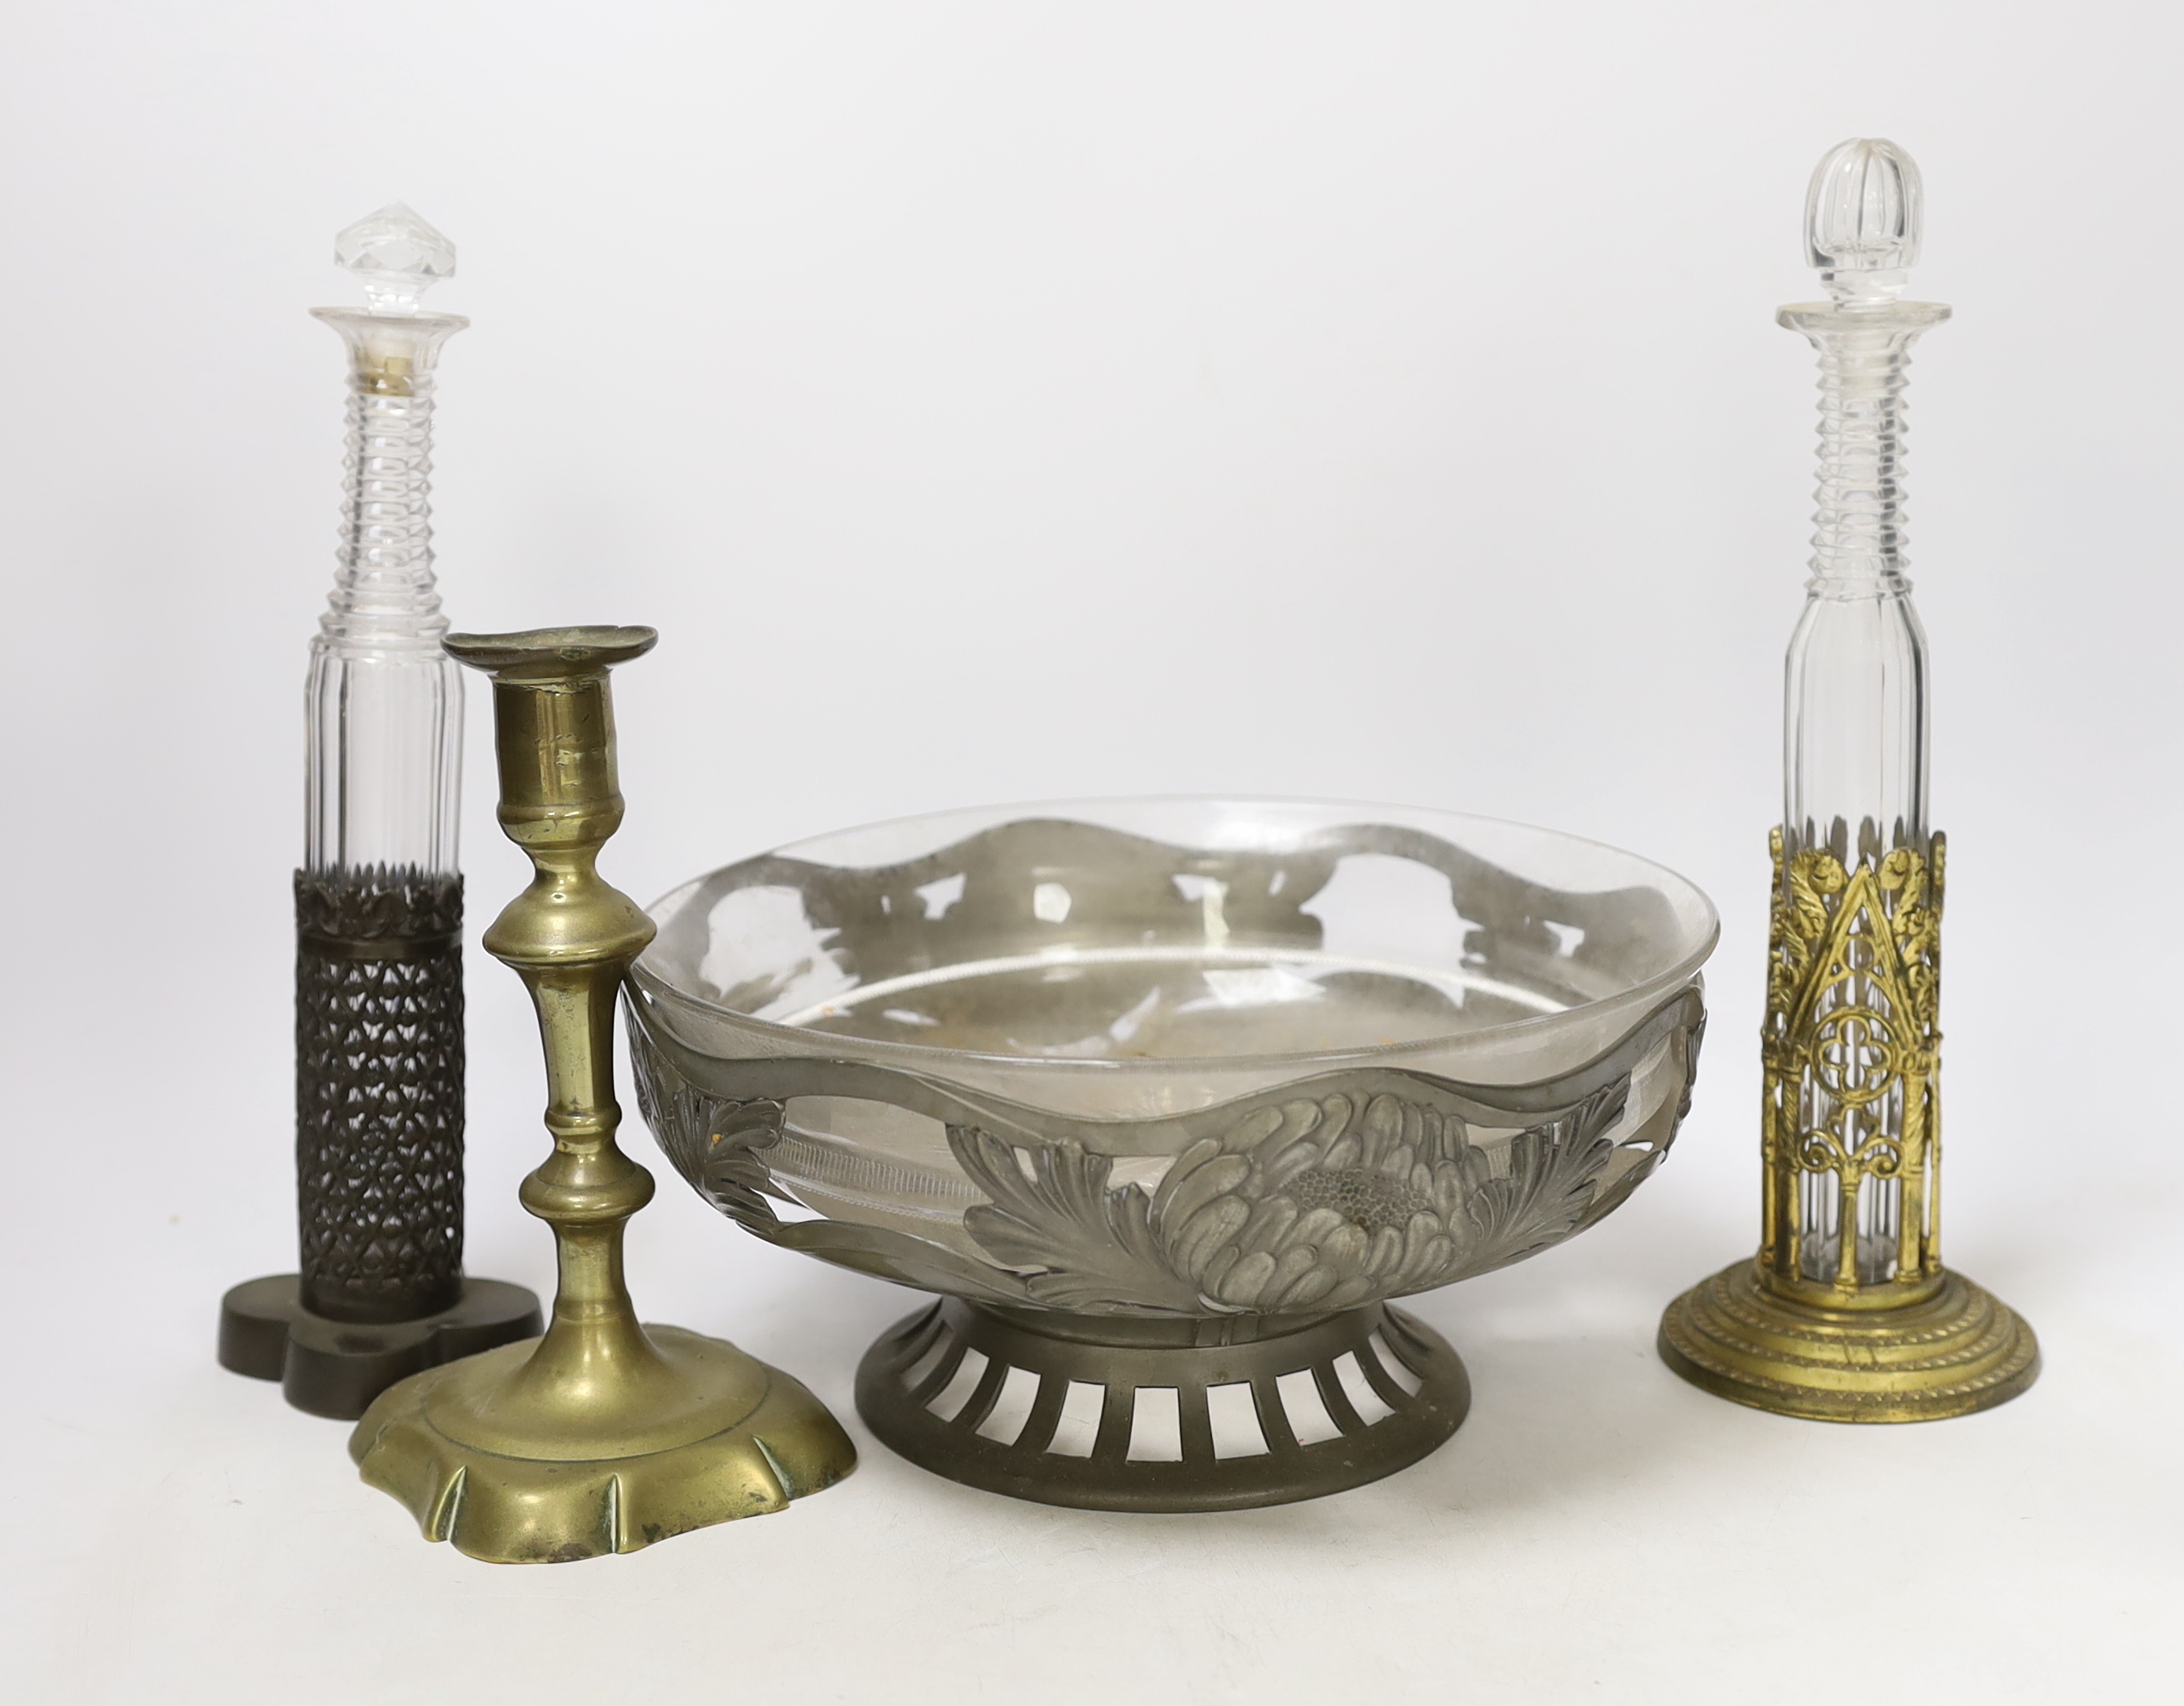 Two mid 19th century prismatic-cut scent bottles in mounts, an Orivit pewter stand and a George II brass candlestick, tallest 28cm